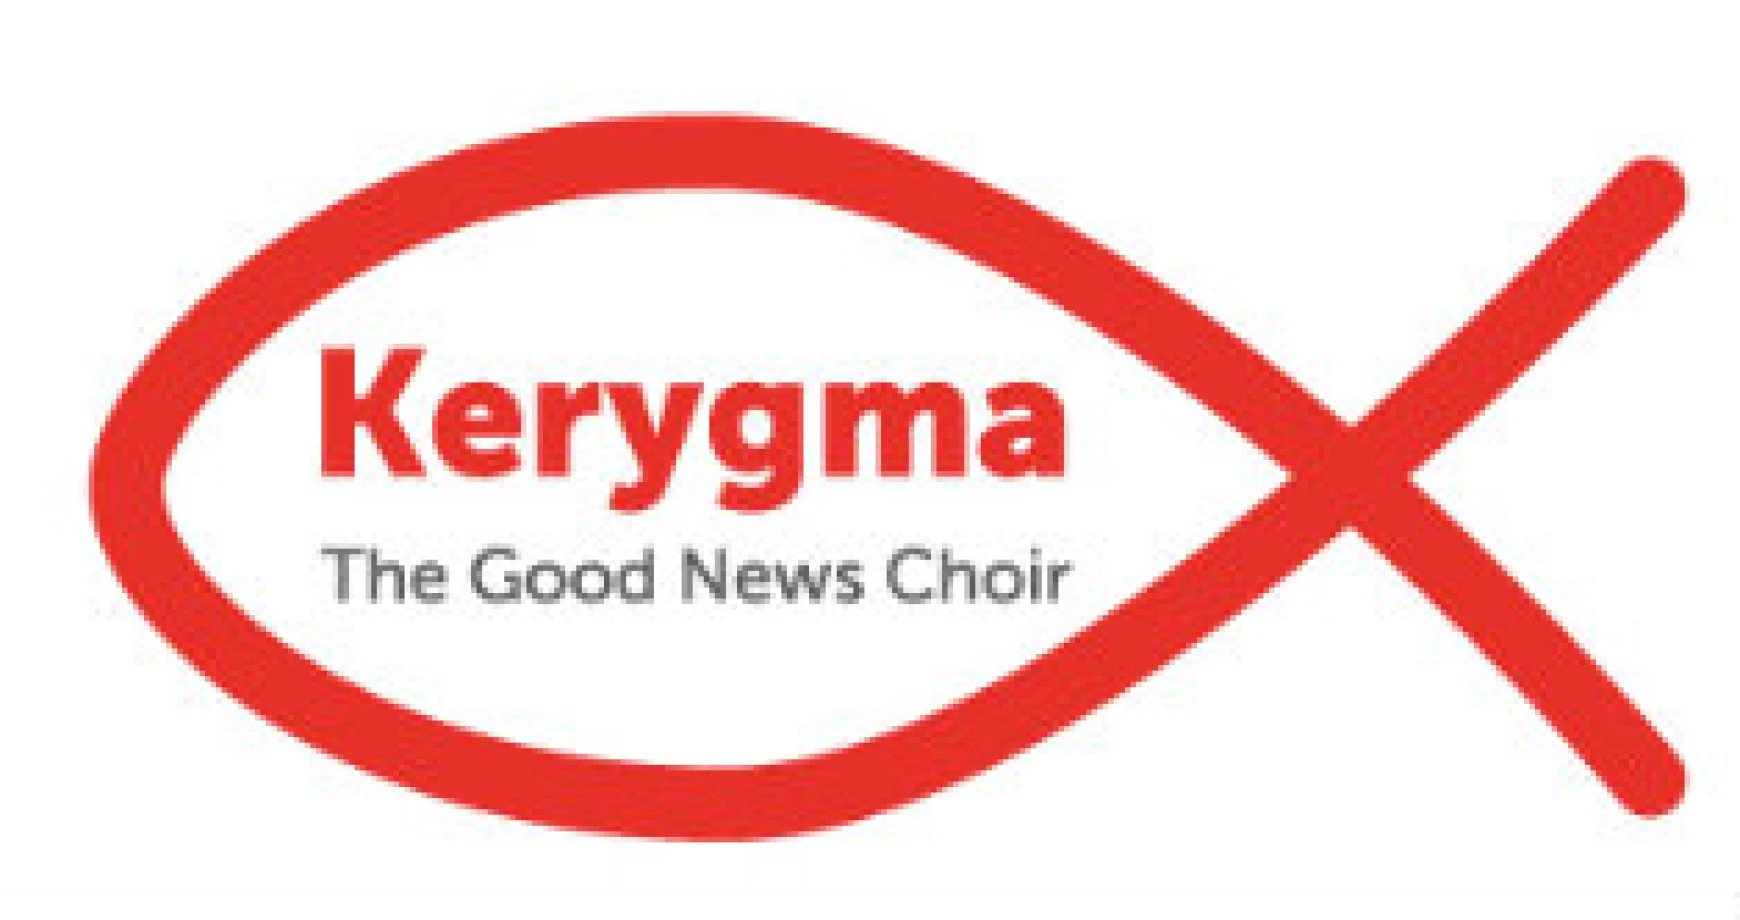 There’s still time to join the Kerygma Choir!